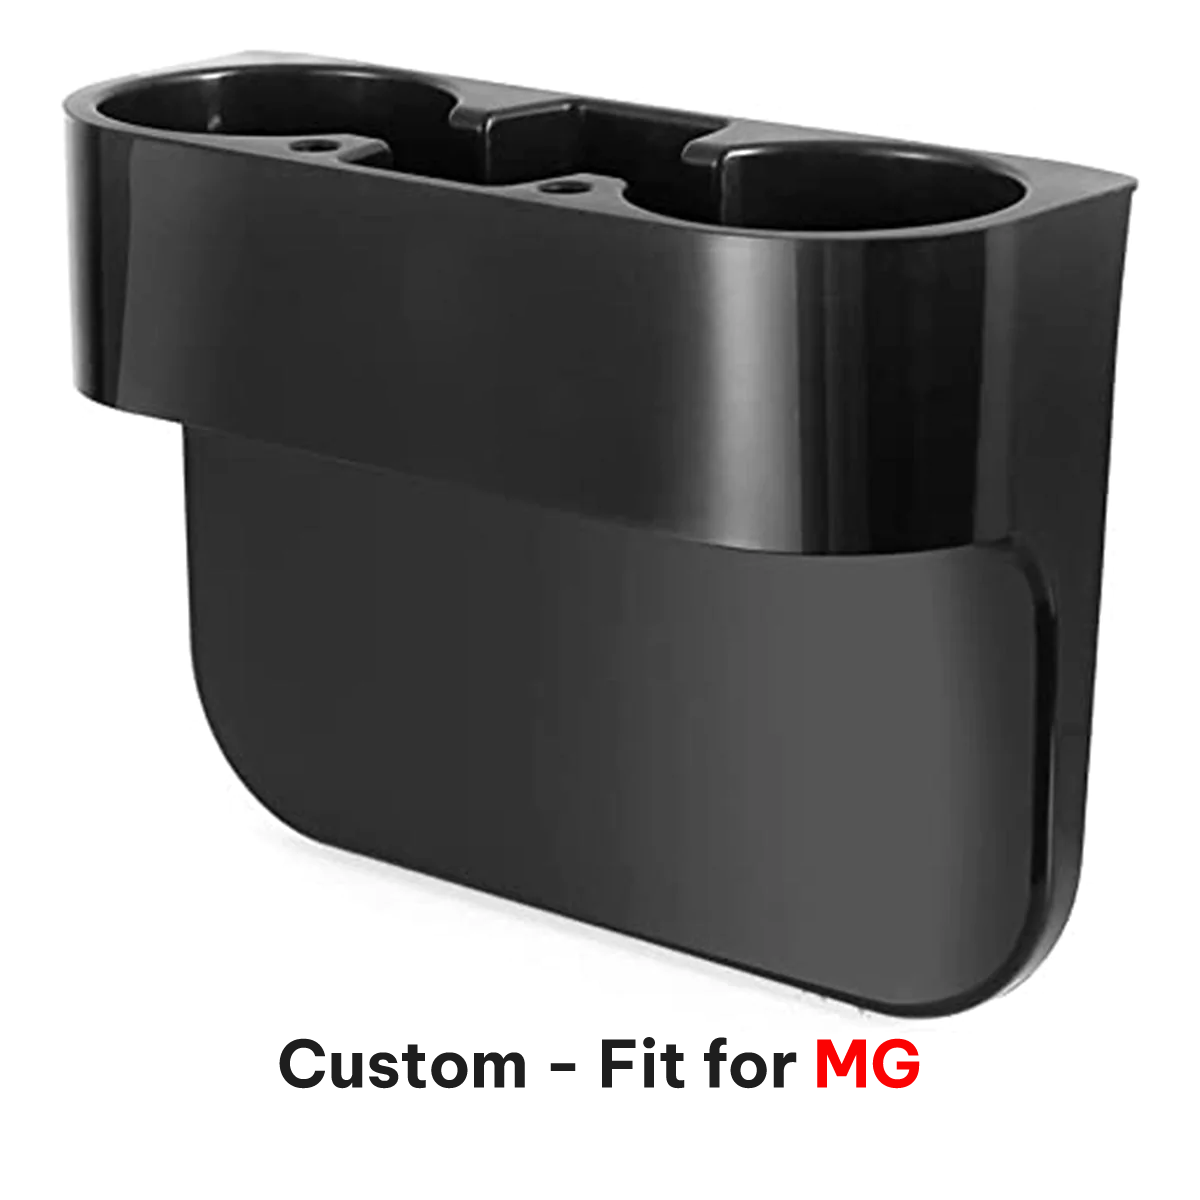 Cup Holder Portable Multifunction Vehicle Seat Cup Cell Phone Drinks Holder Box Car Interior Organizer, Custom-Fit For Car, Car Accessories DLMC231